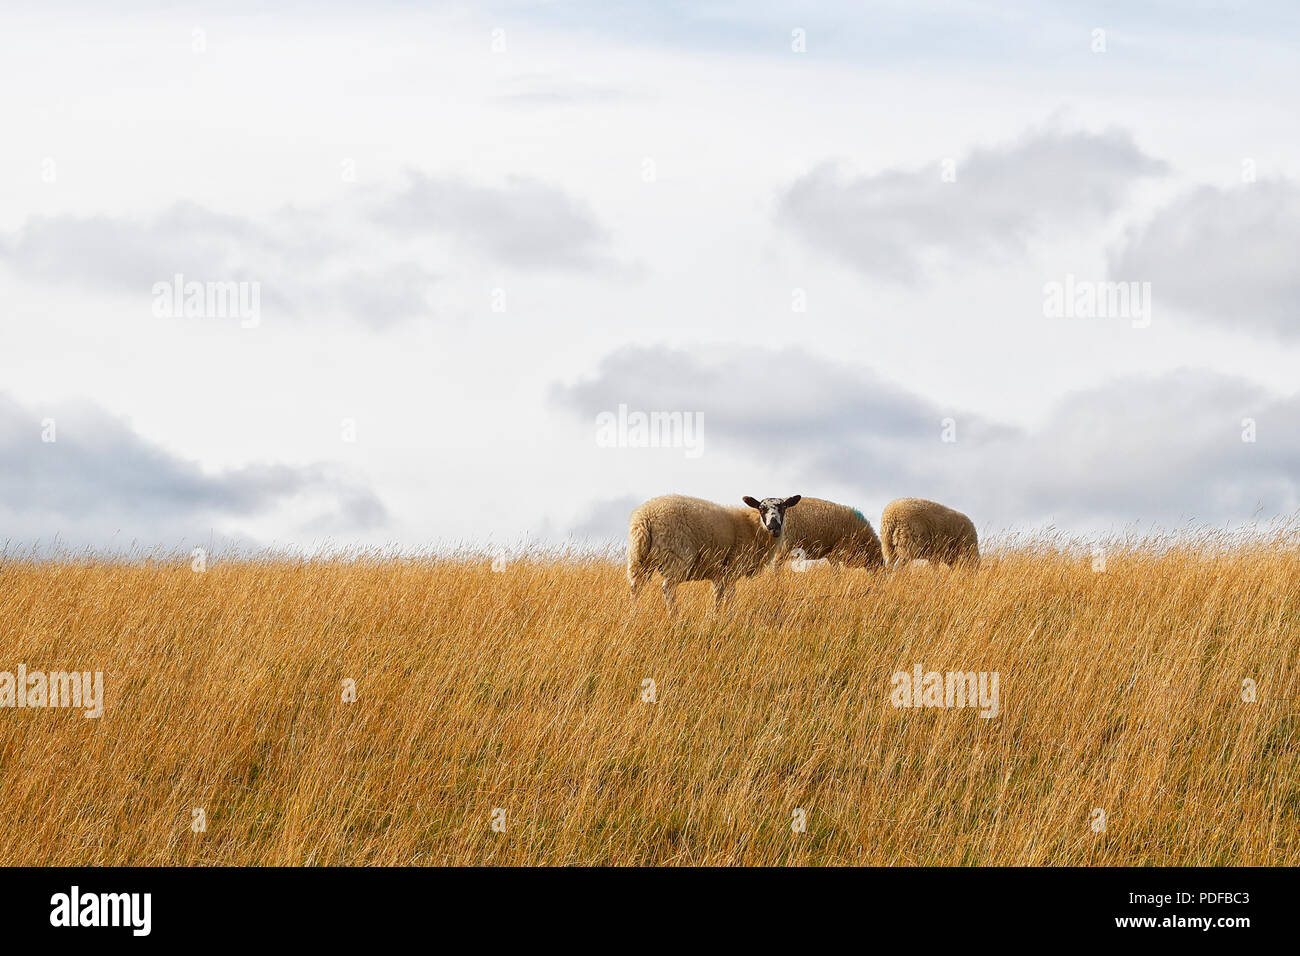 Sheep grazing in field of dry grass in the Nidderdale area of North Yorkshire Stock Photo